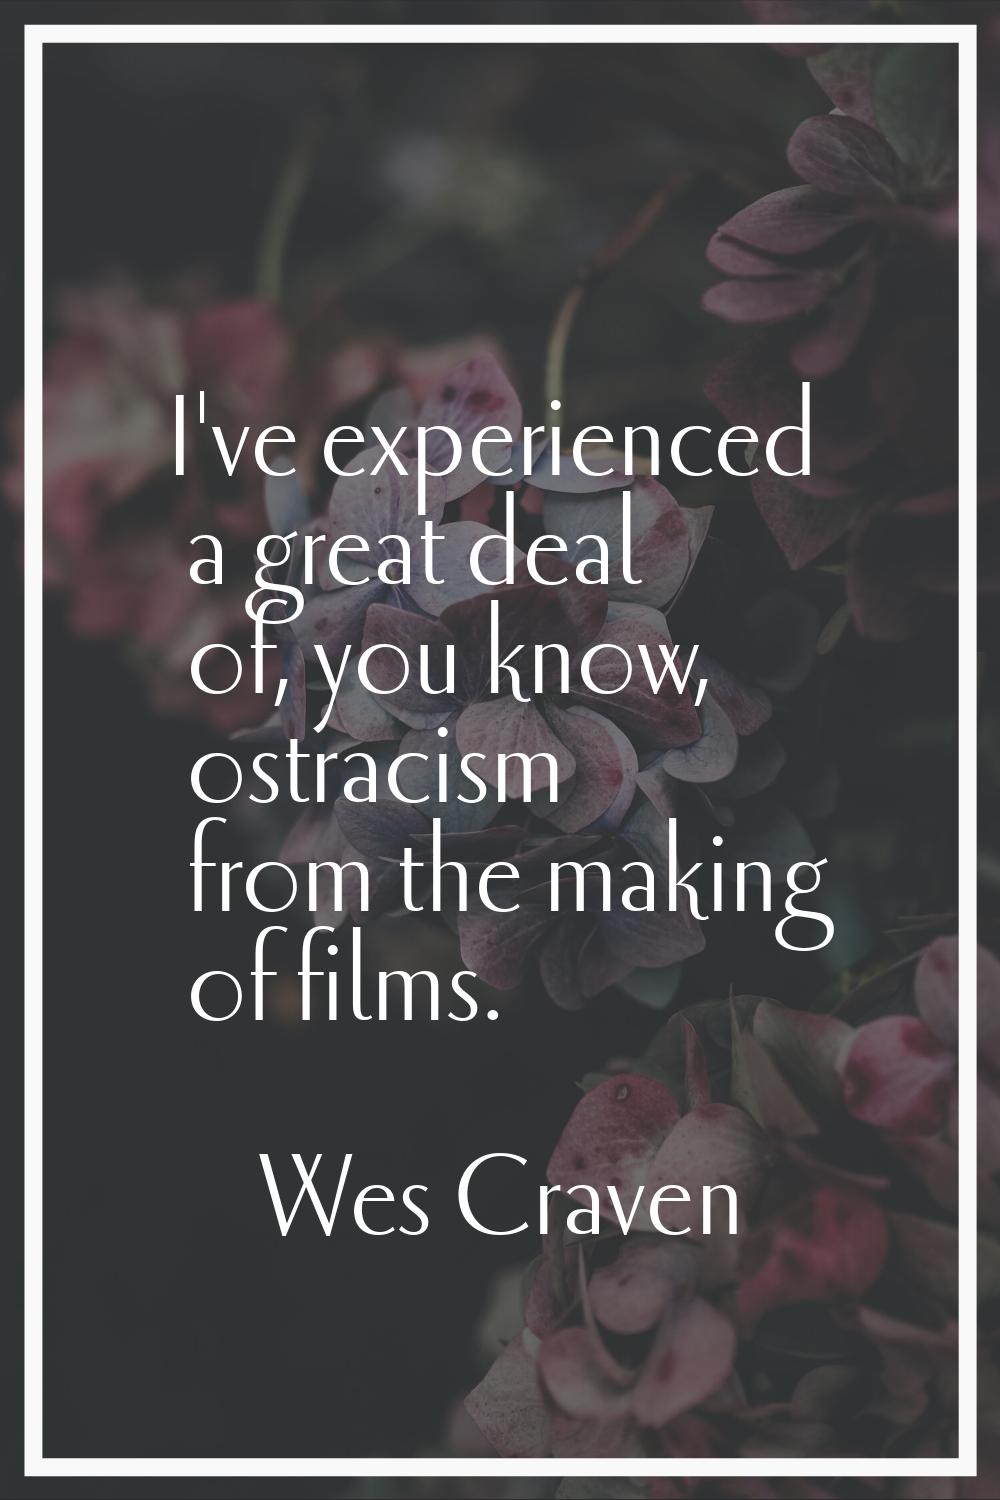 I've experienced a great deal of, you know, ostracism from the making of films.